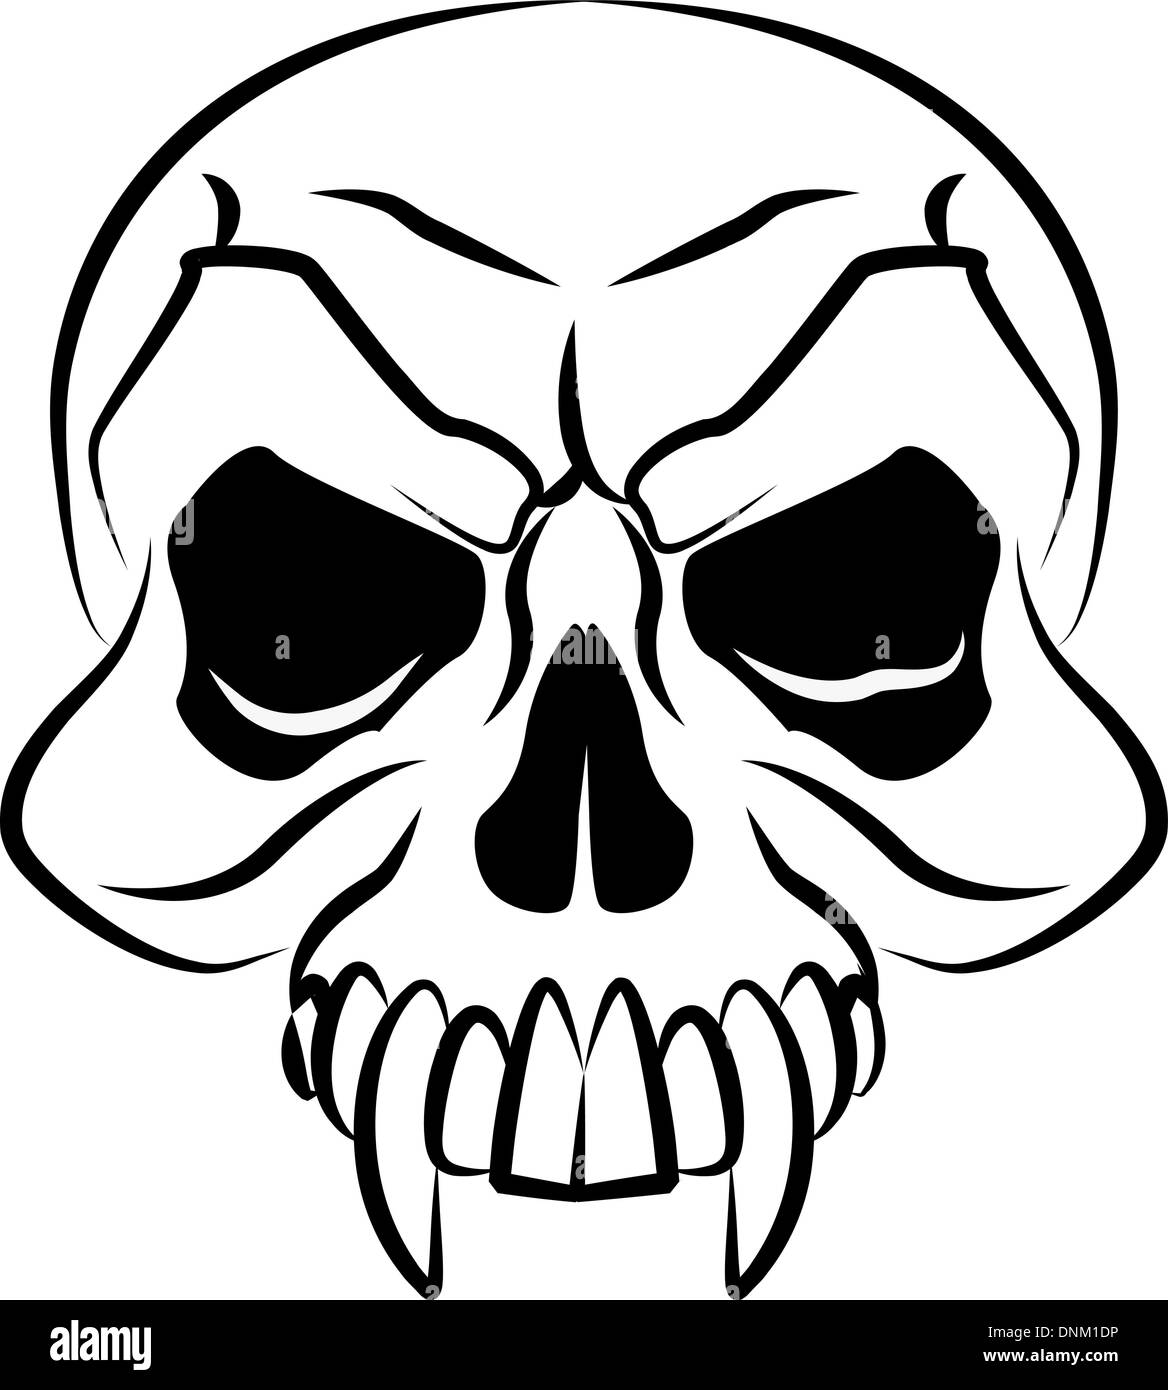 Black and white illustration of scary skull head Stock Vector